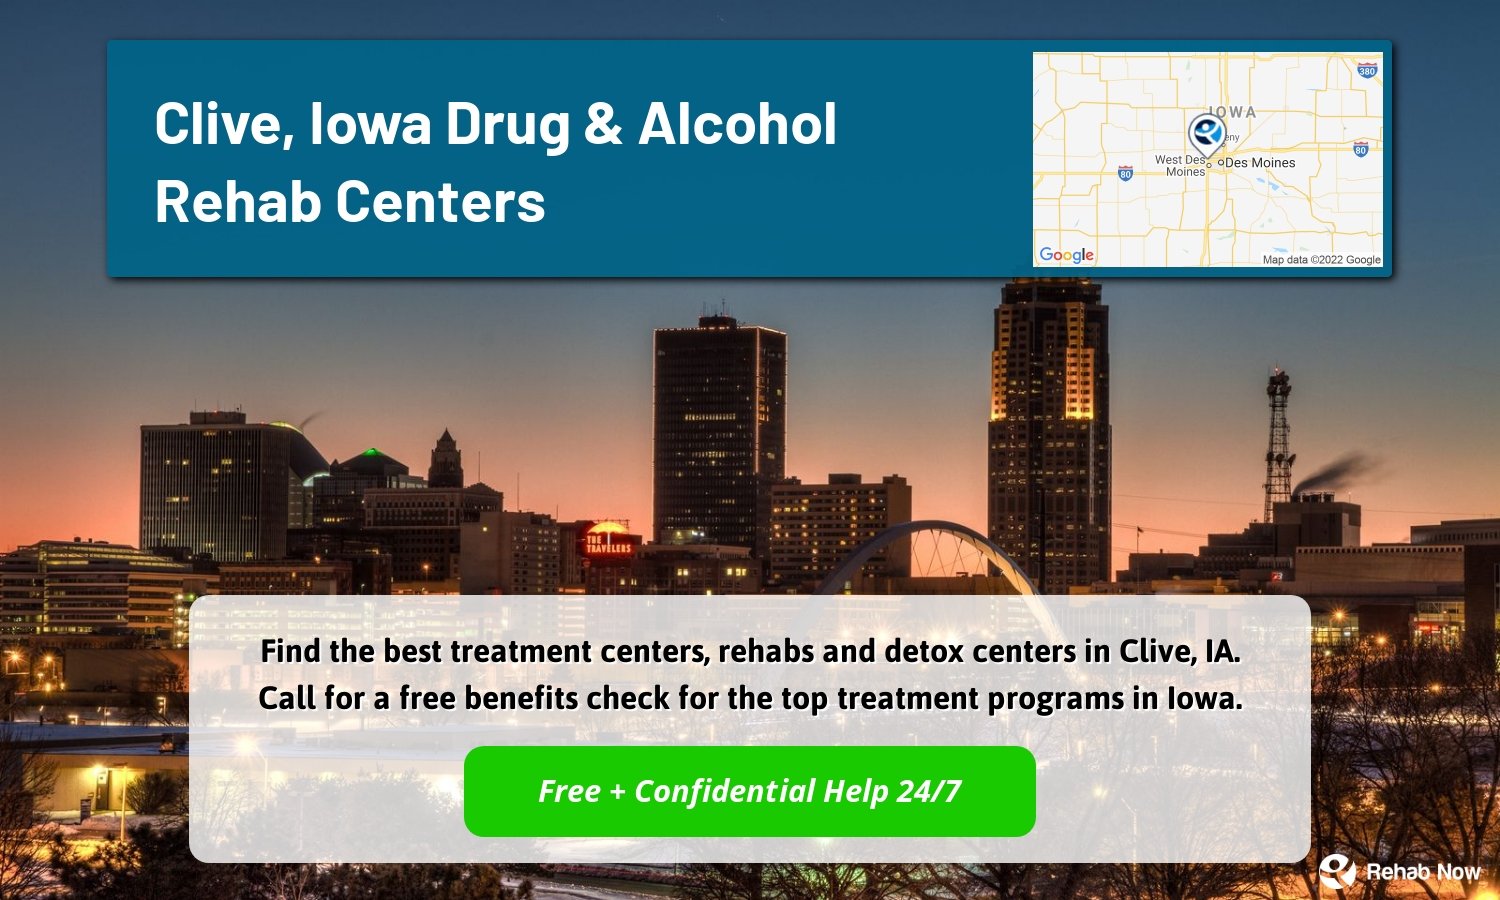 Find the best treatment centers, rehabs and detox centers in Clive, IA. Call for a free benefits check for the top treatment programs in Iowa.